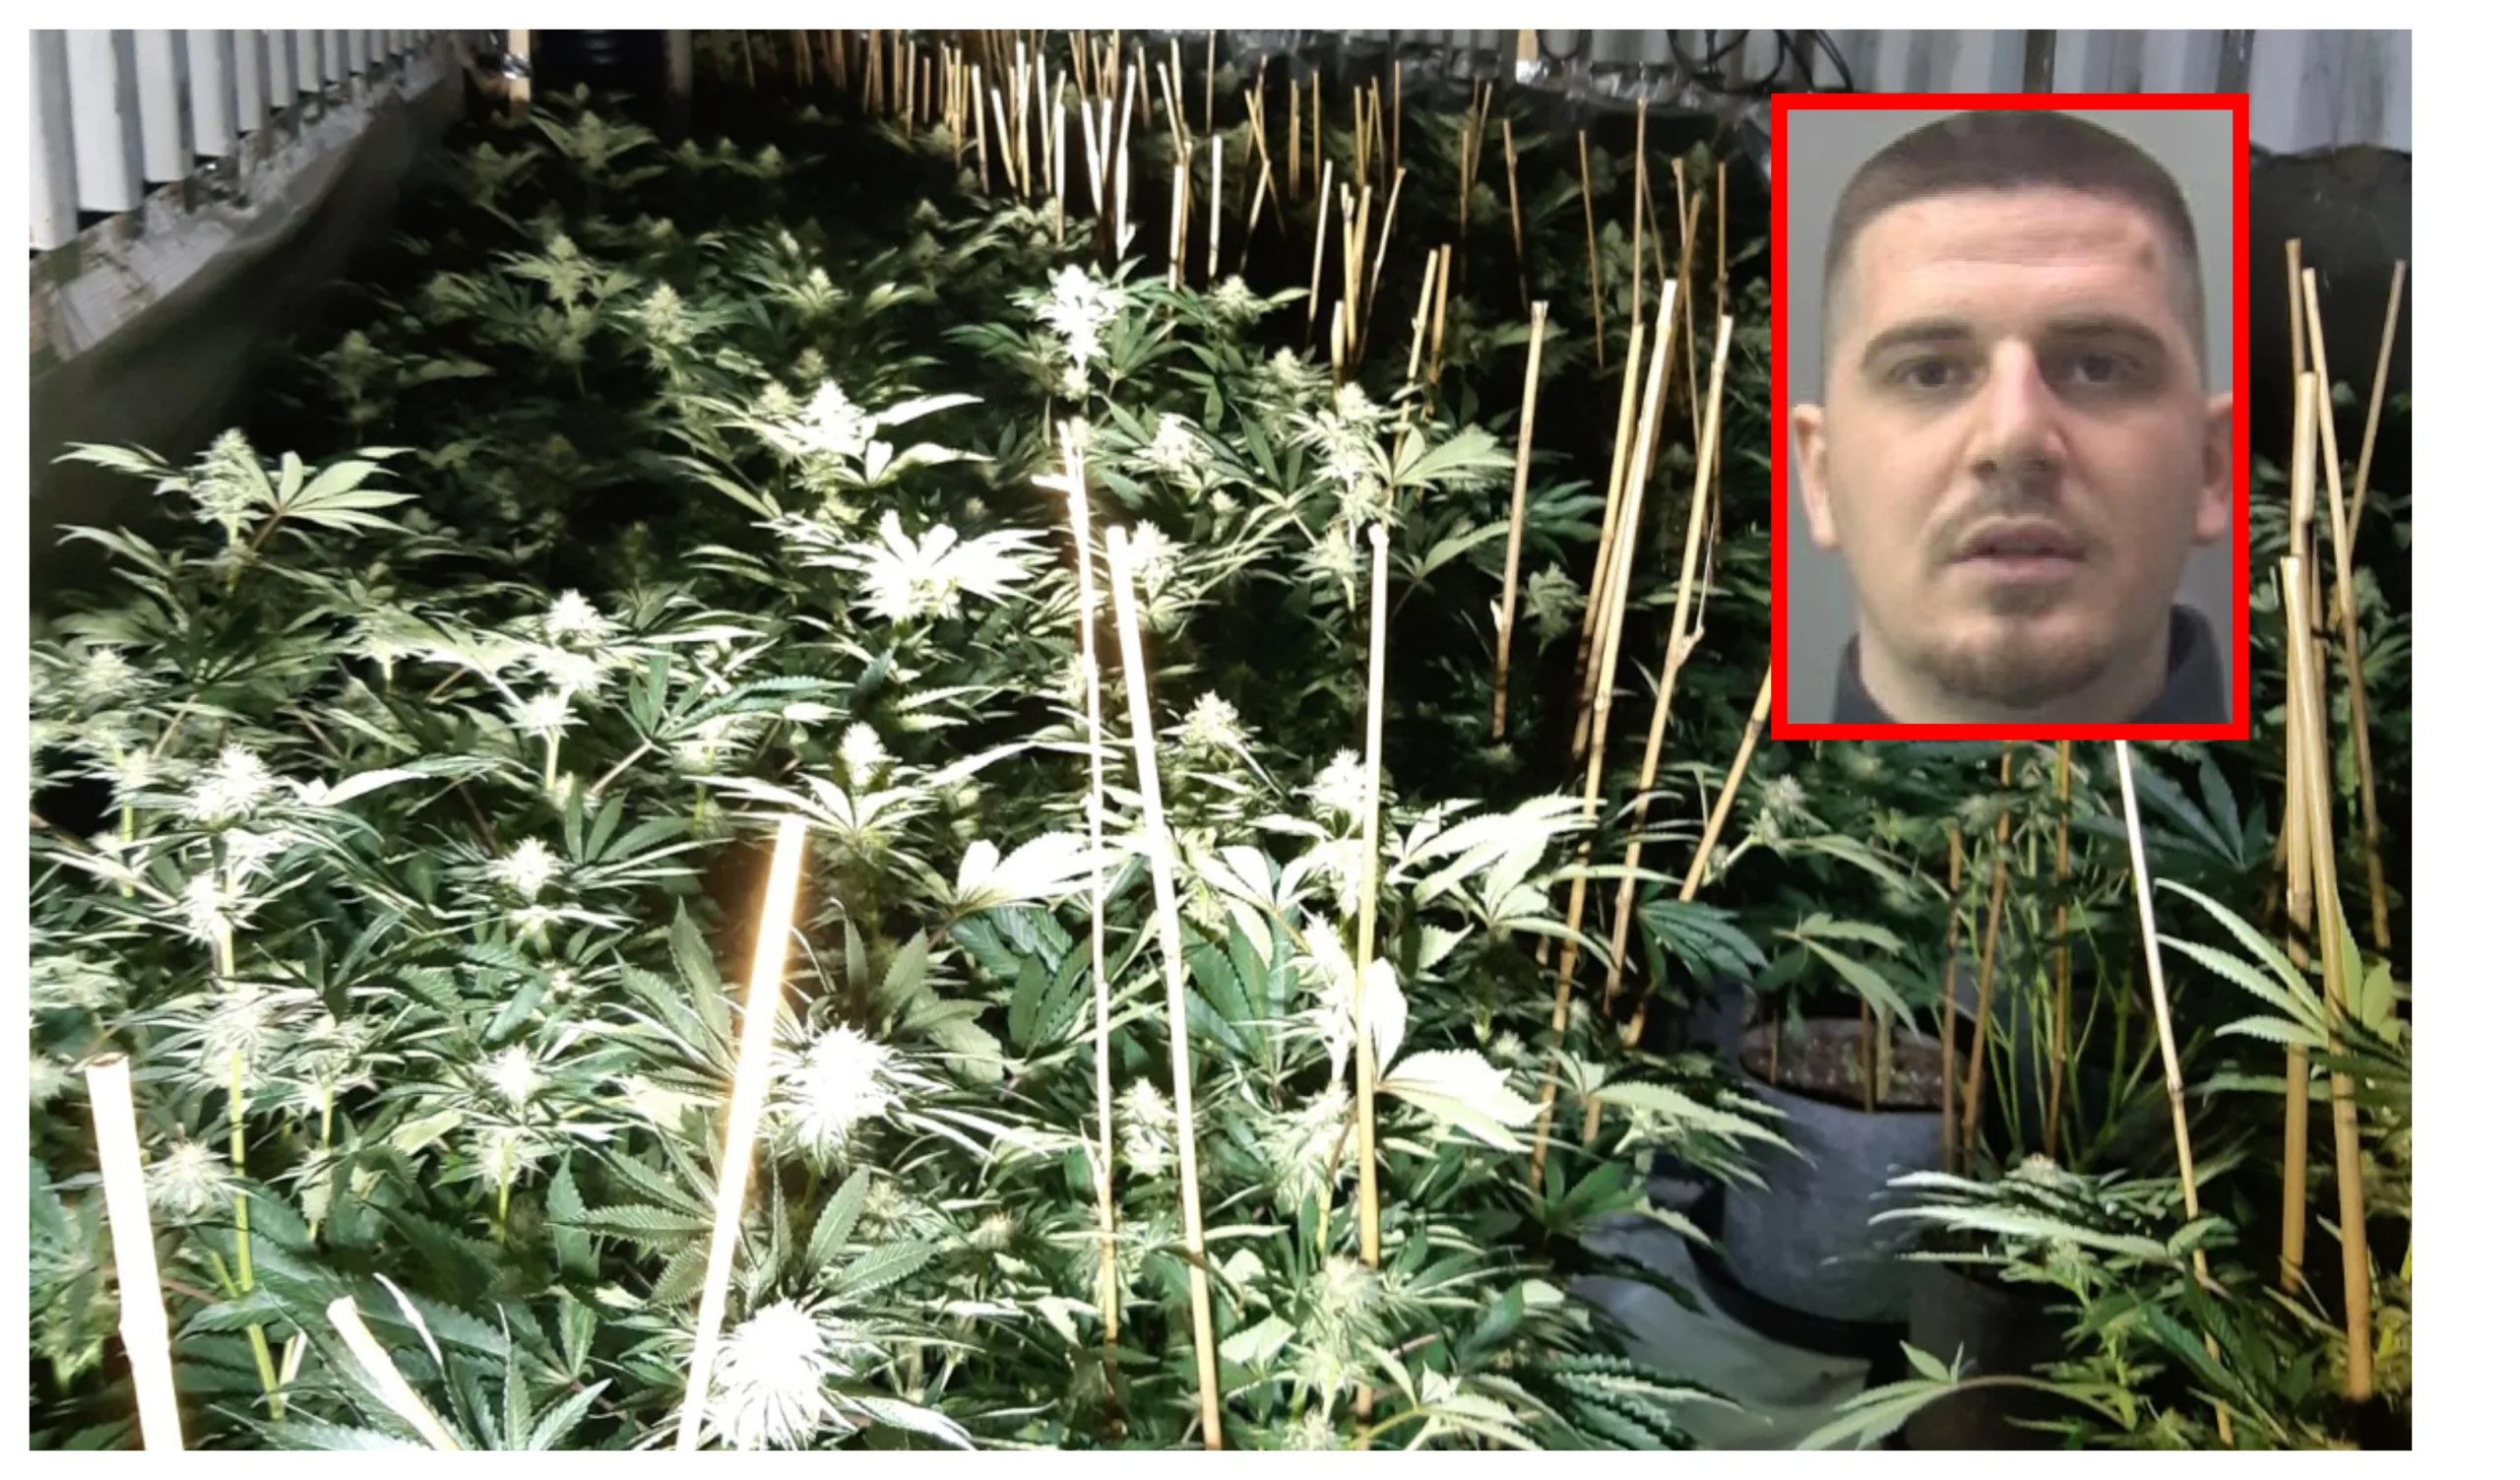 Ardit Pali was caught after DNA and fingerprint evidence  were used to identify him in major cannabis growing operation